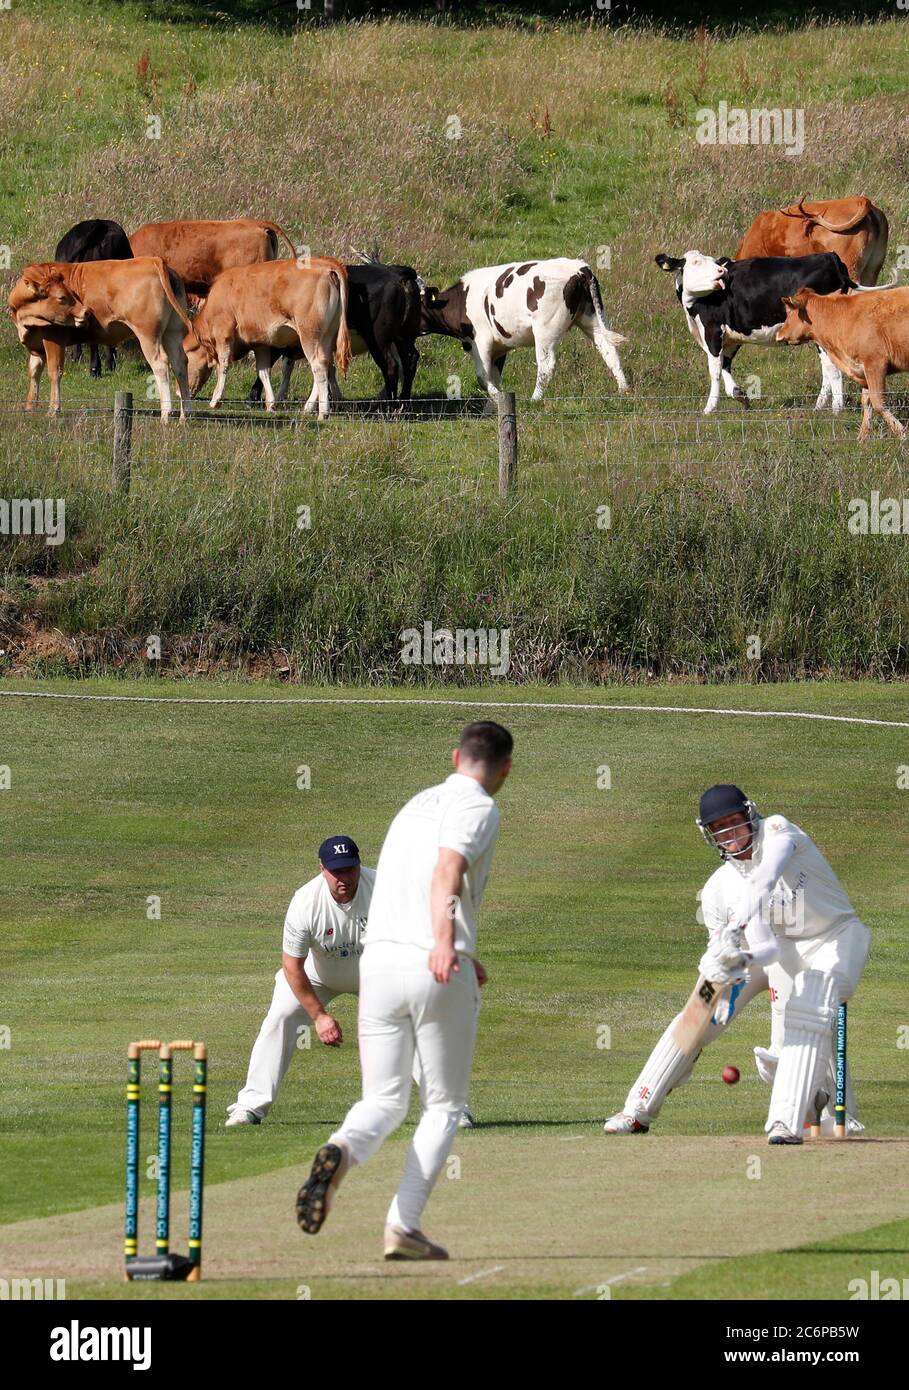 Newtown Linford, Leicestershire, UK. 11th July 2020. Newtown Linford Cricket Club play Oakham after the UK government relaxed coronavirus pandemic lockdown restrictions for several outdoor activities. Credit Darren Staples/Alamy Live News. Stock Photo